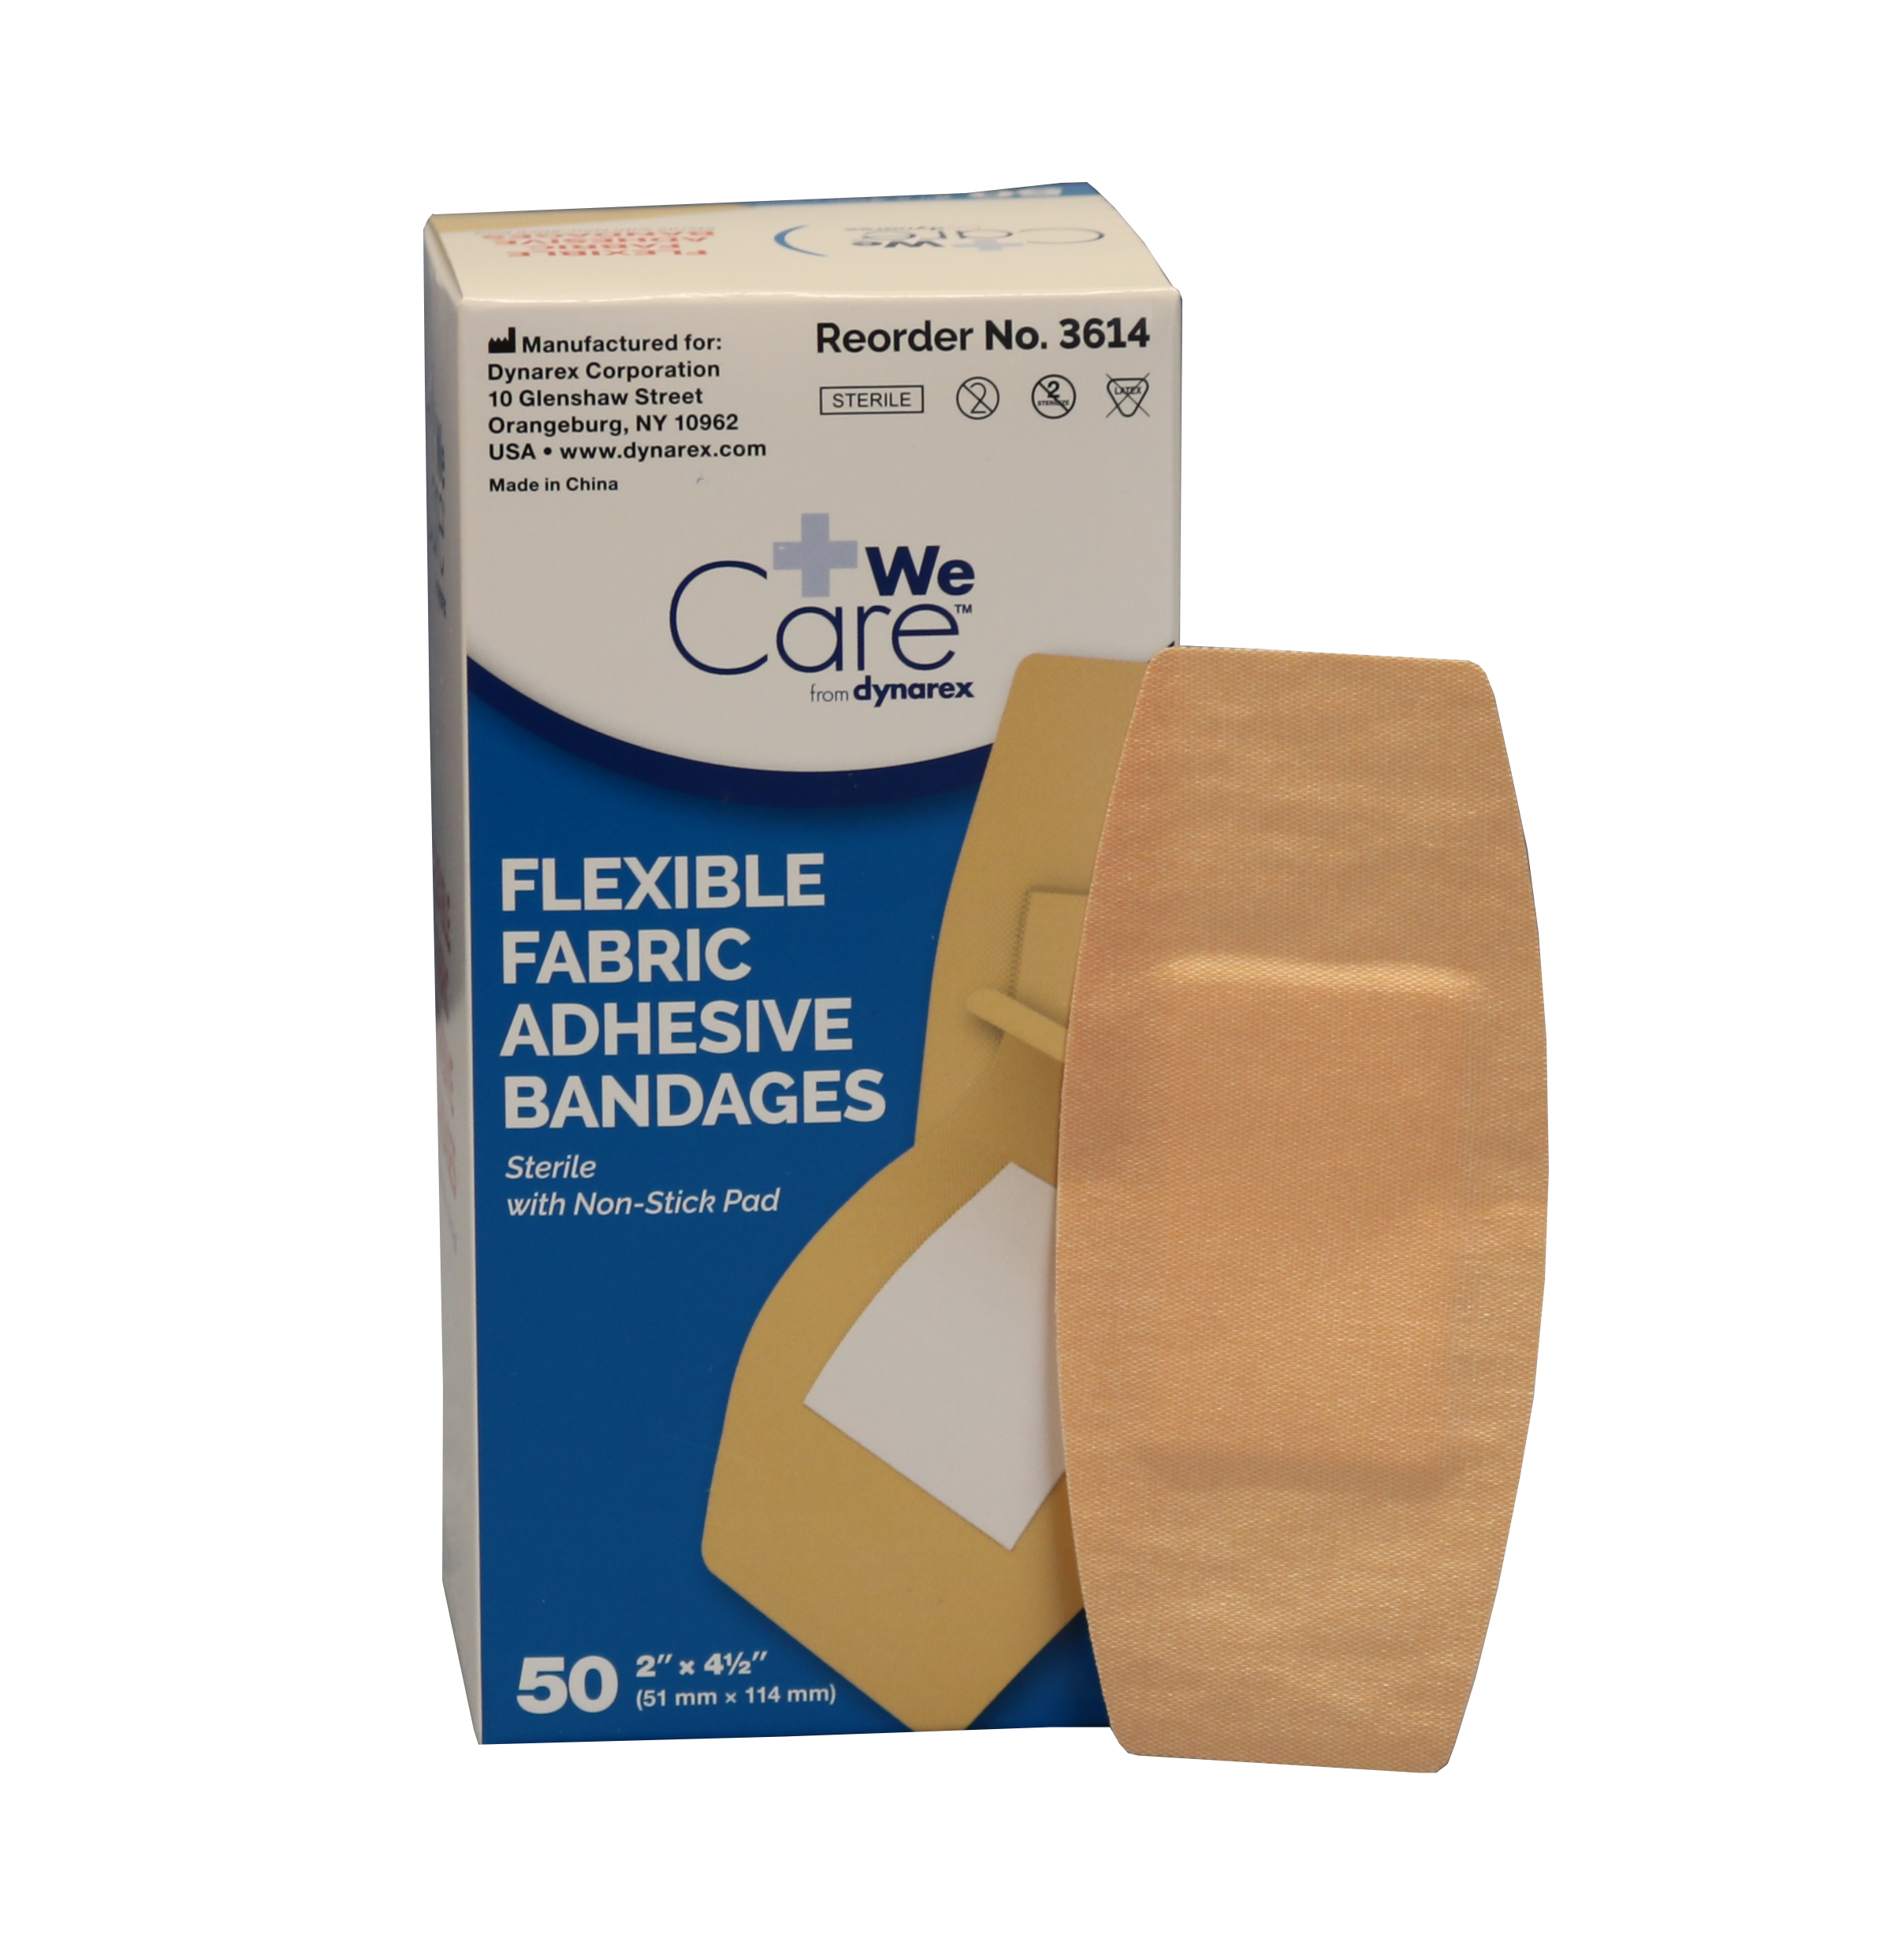 Adhesive Bandages & First Aid Supplies